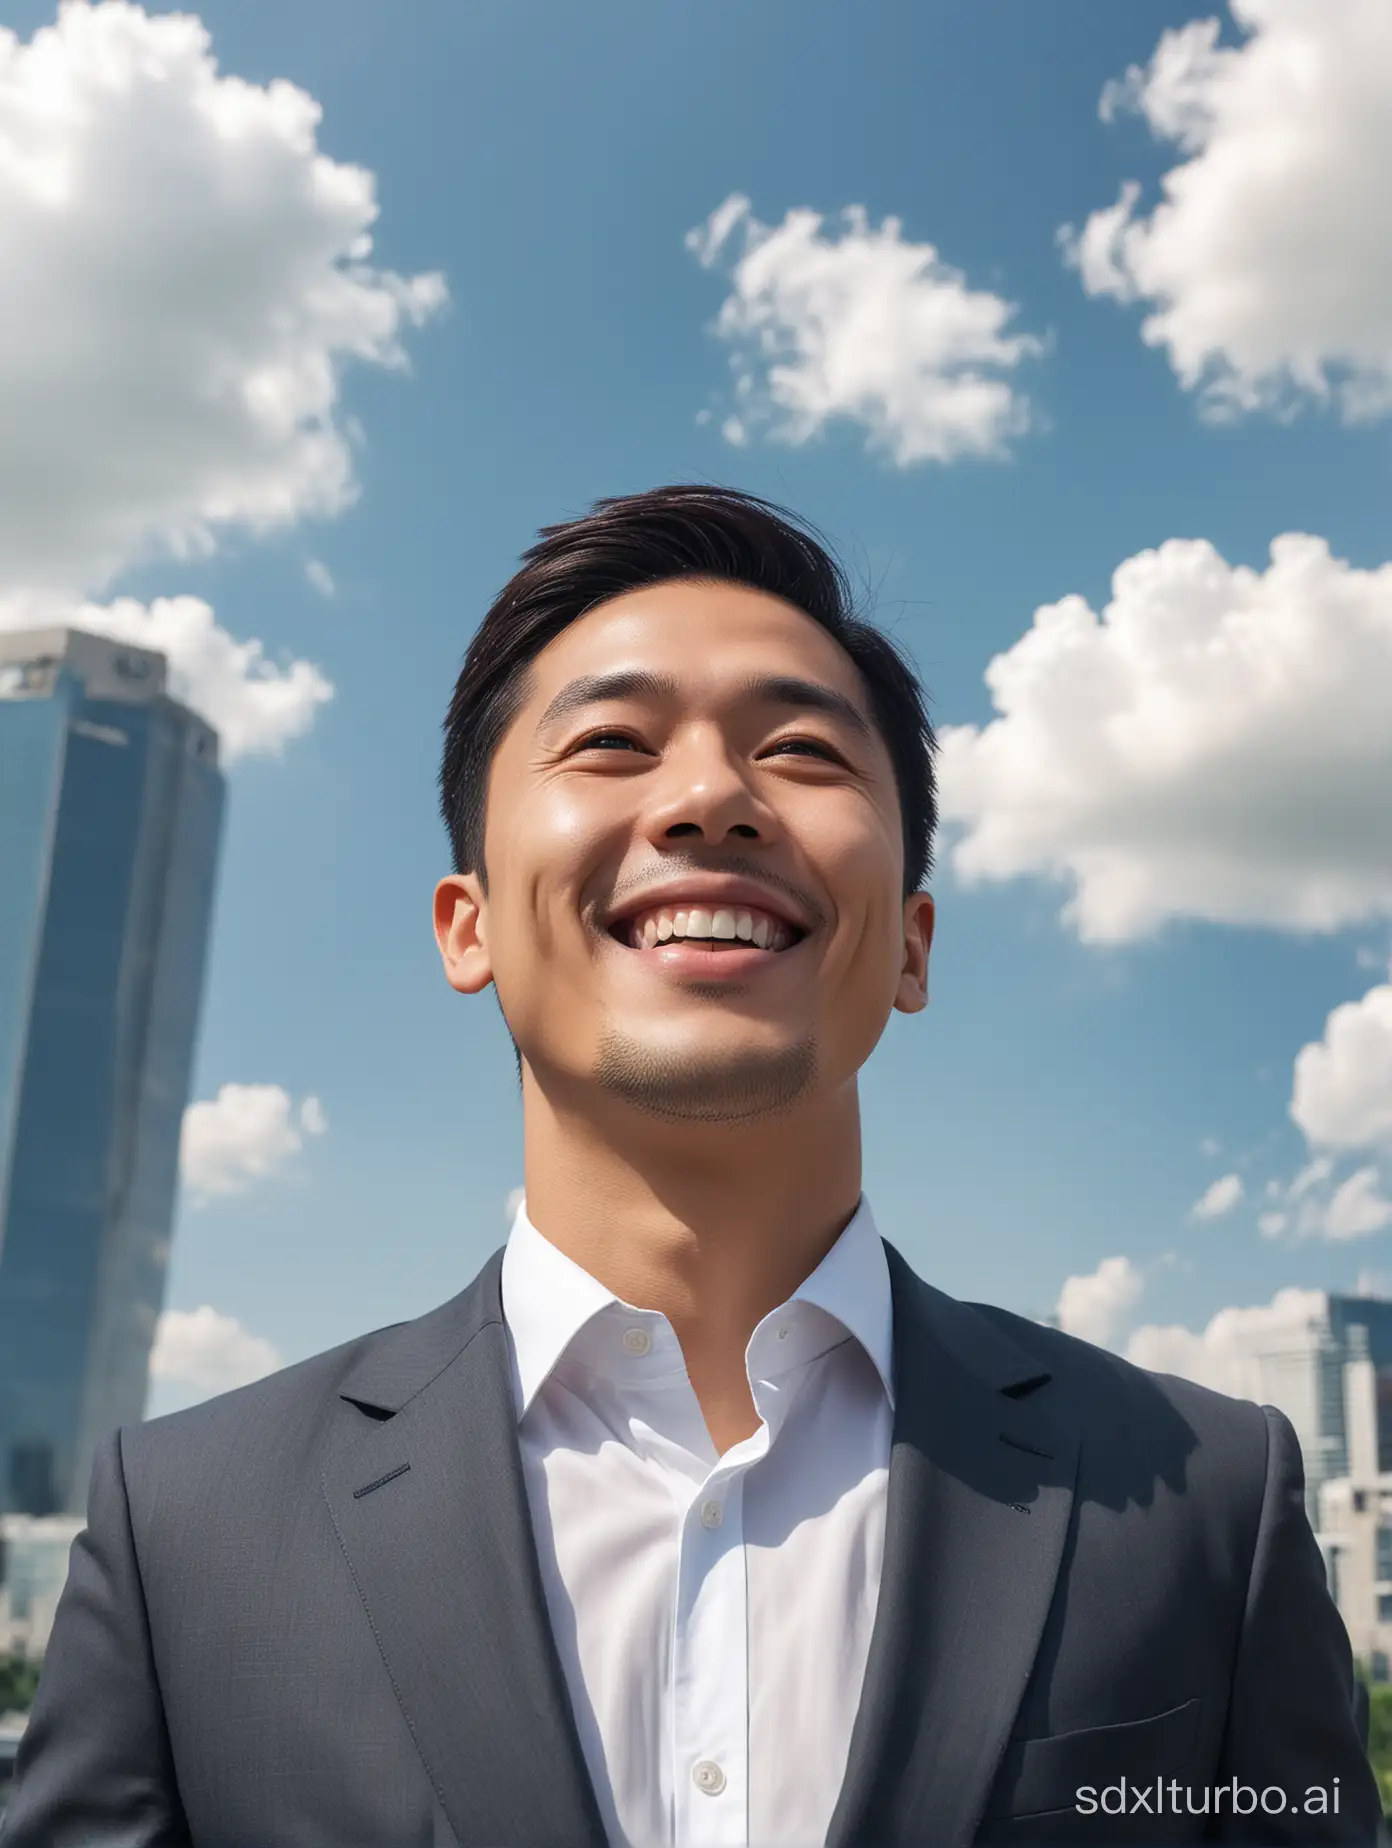 Asian-Businessman-Talking-with-Confidence-Under-City-Skyline